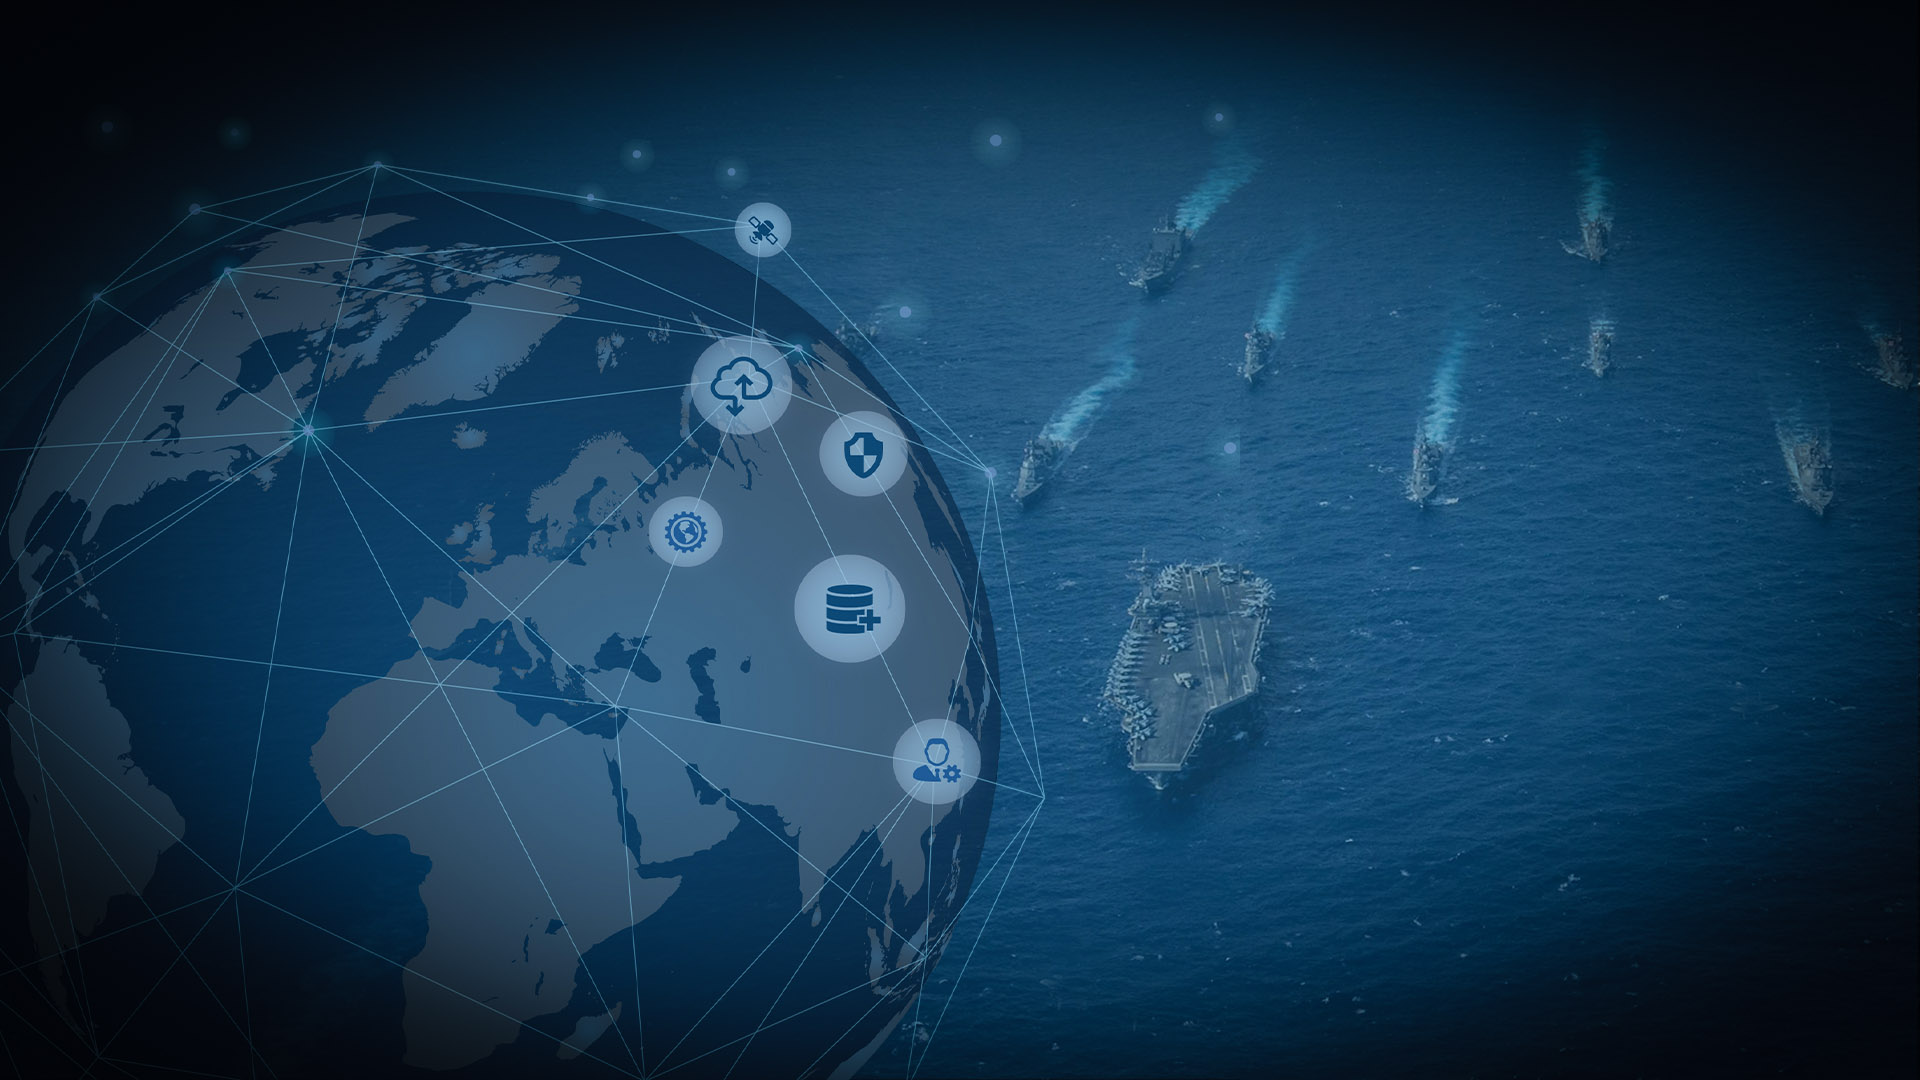 A globe is shown with network icons (security, database & cloud), right aircraft carrier and ships.